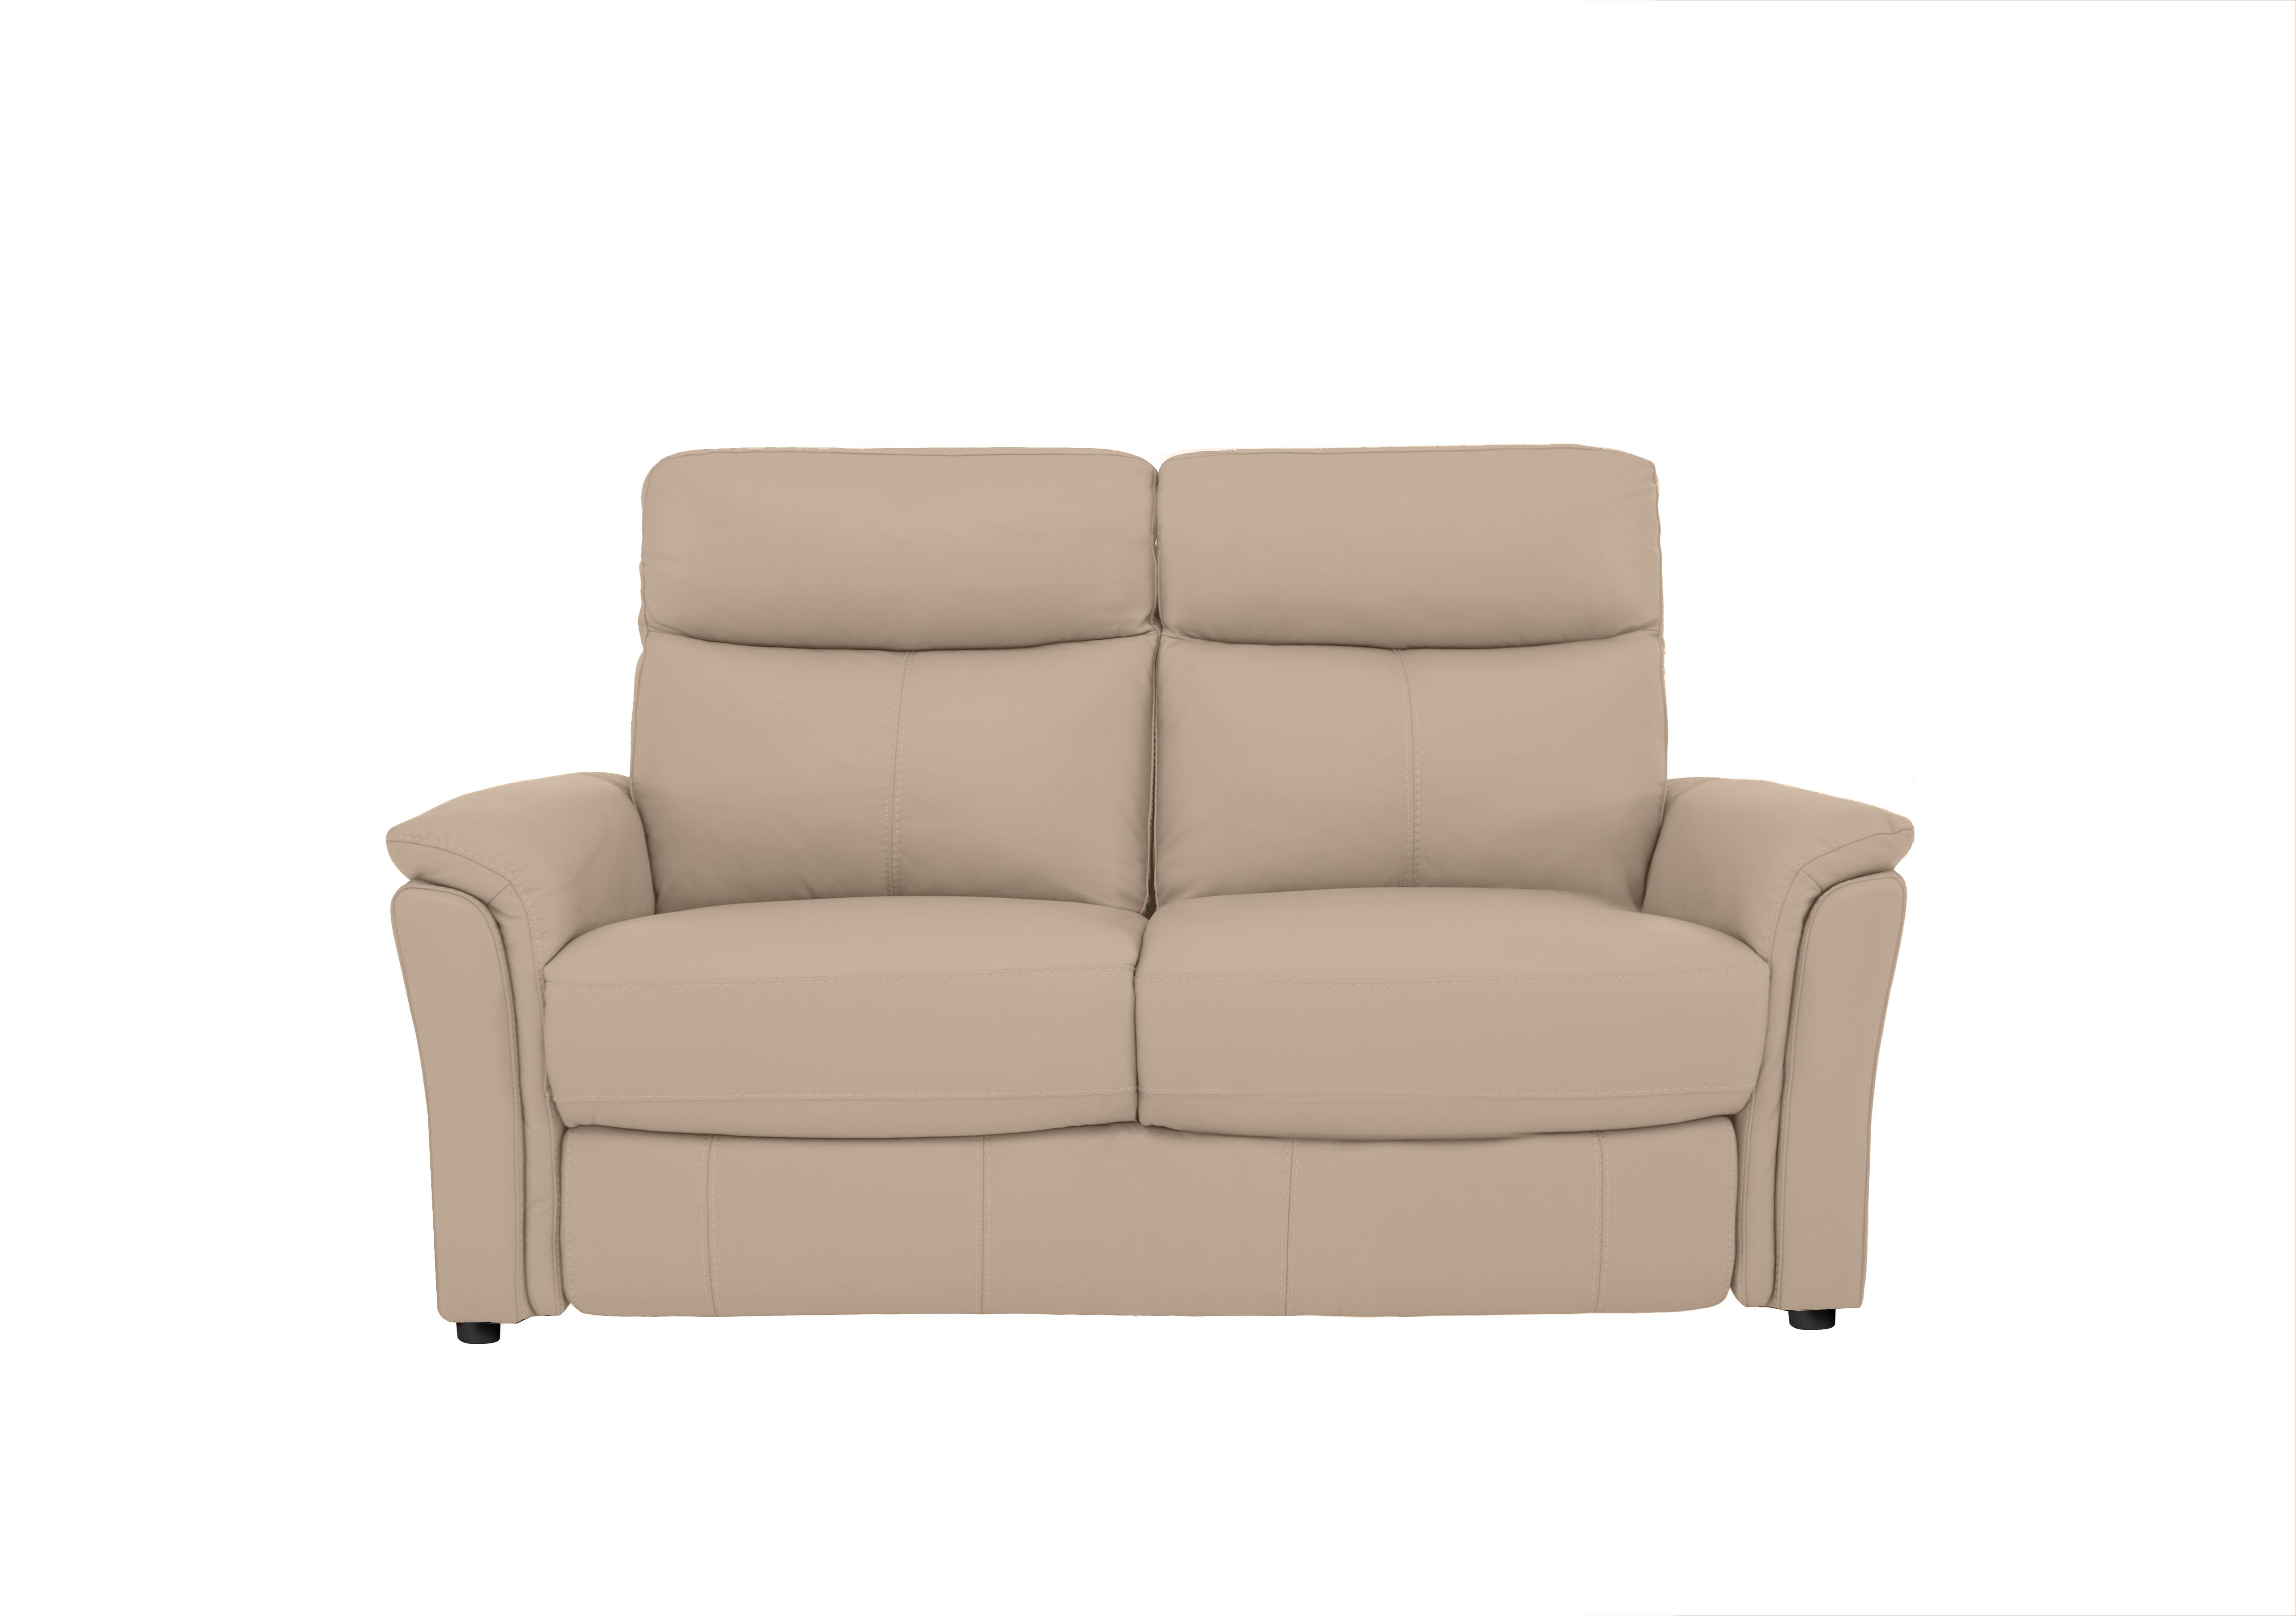 Compact Collection Piccolo 2 Seater Leather Static Sofa in Bv-039c Pebble on Furniture Village